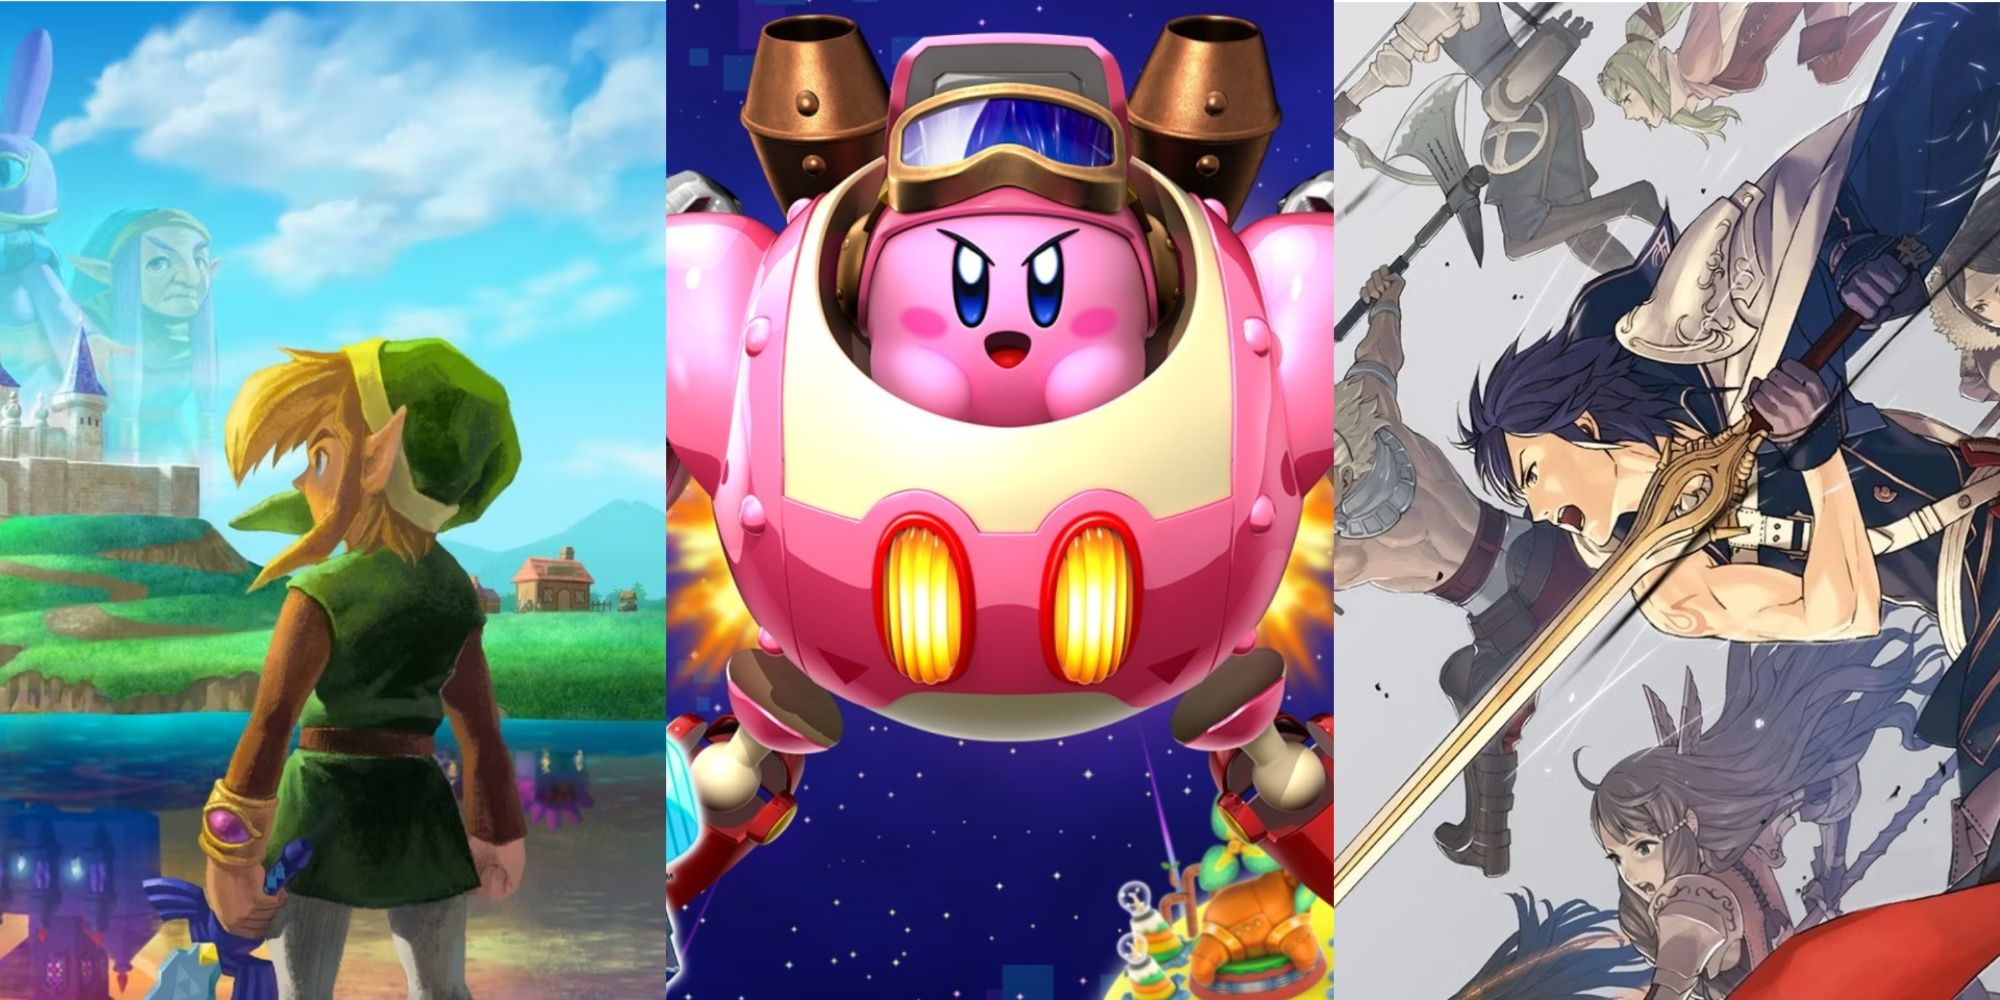 Split images of A Link Between Worlds, Kirby Planet Robobot, and Fire Emblem Awakening